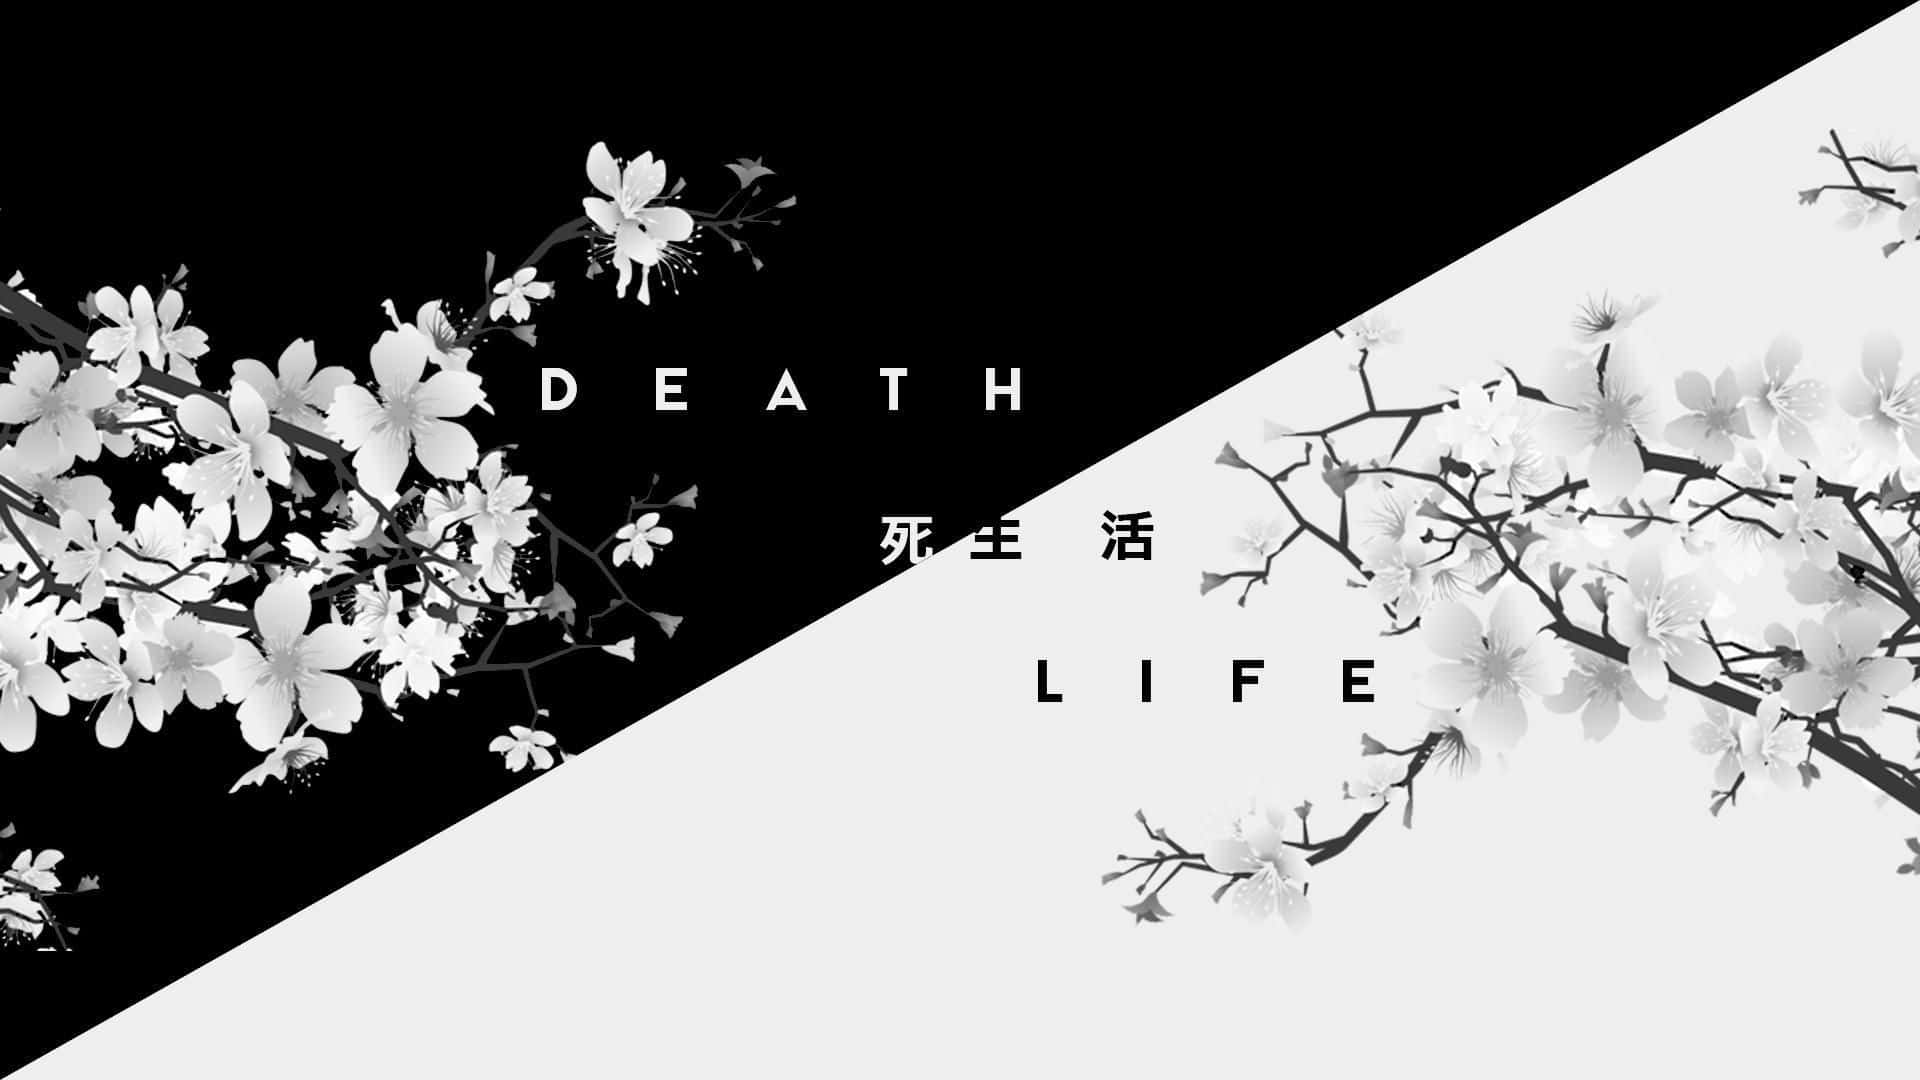 Death Life - A Black And White Image Of Flowers Wallpaper